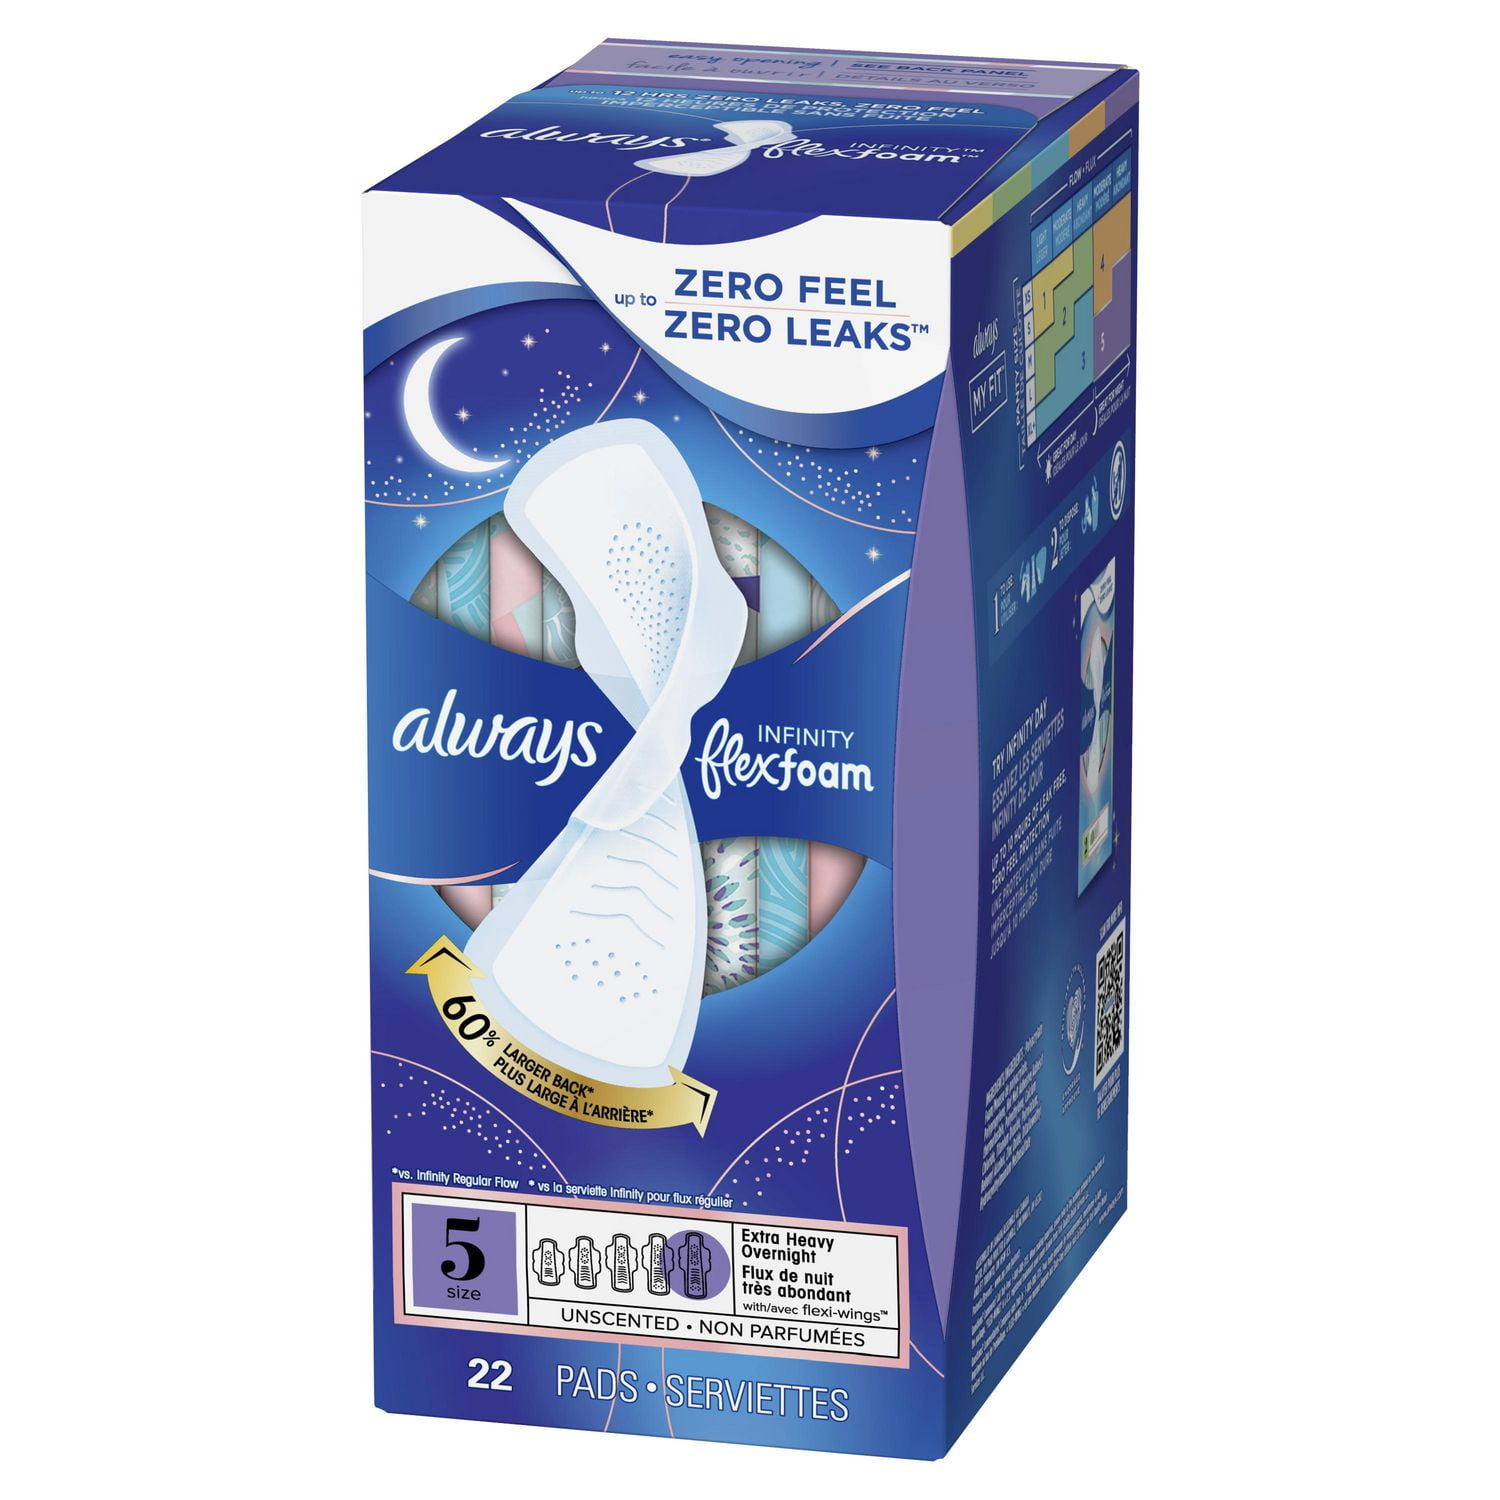 Always Maxi Pads for Women, Size 5 Extra Heavy Overnight Pads With Wings  Unscented, 27 Count (Packaging may vary) & Maxi Pads for Women, Size 4 